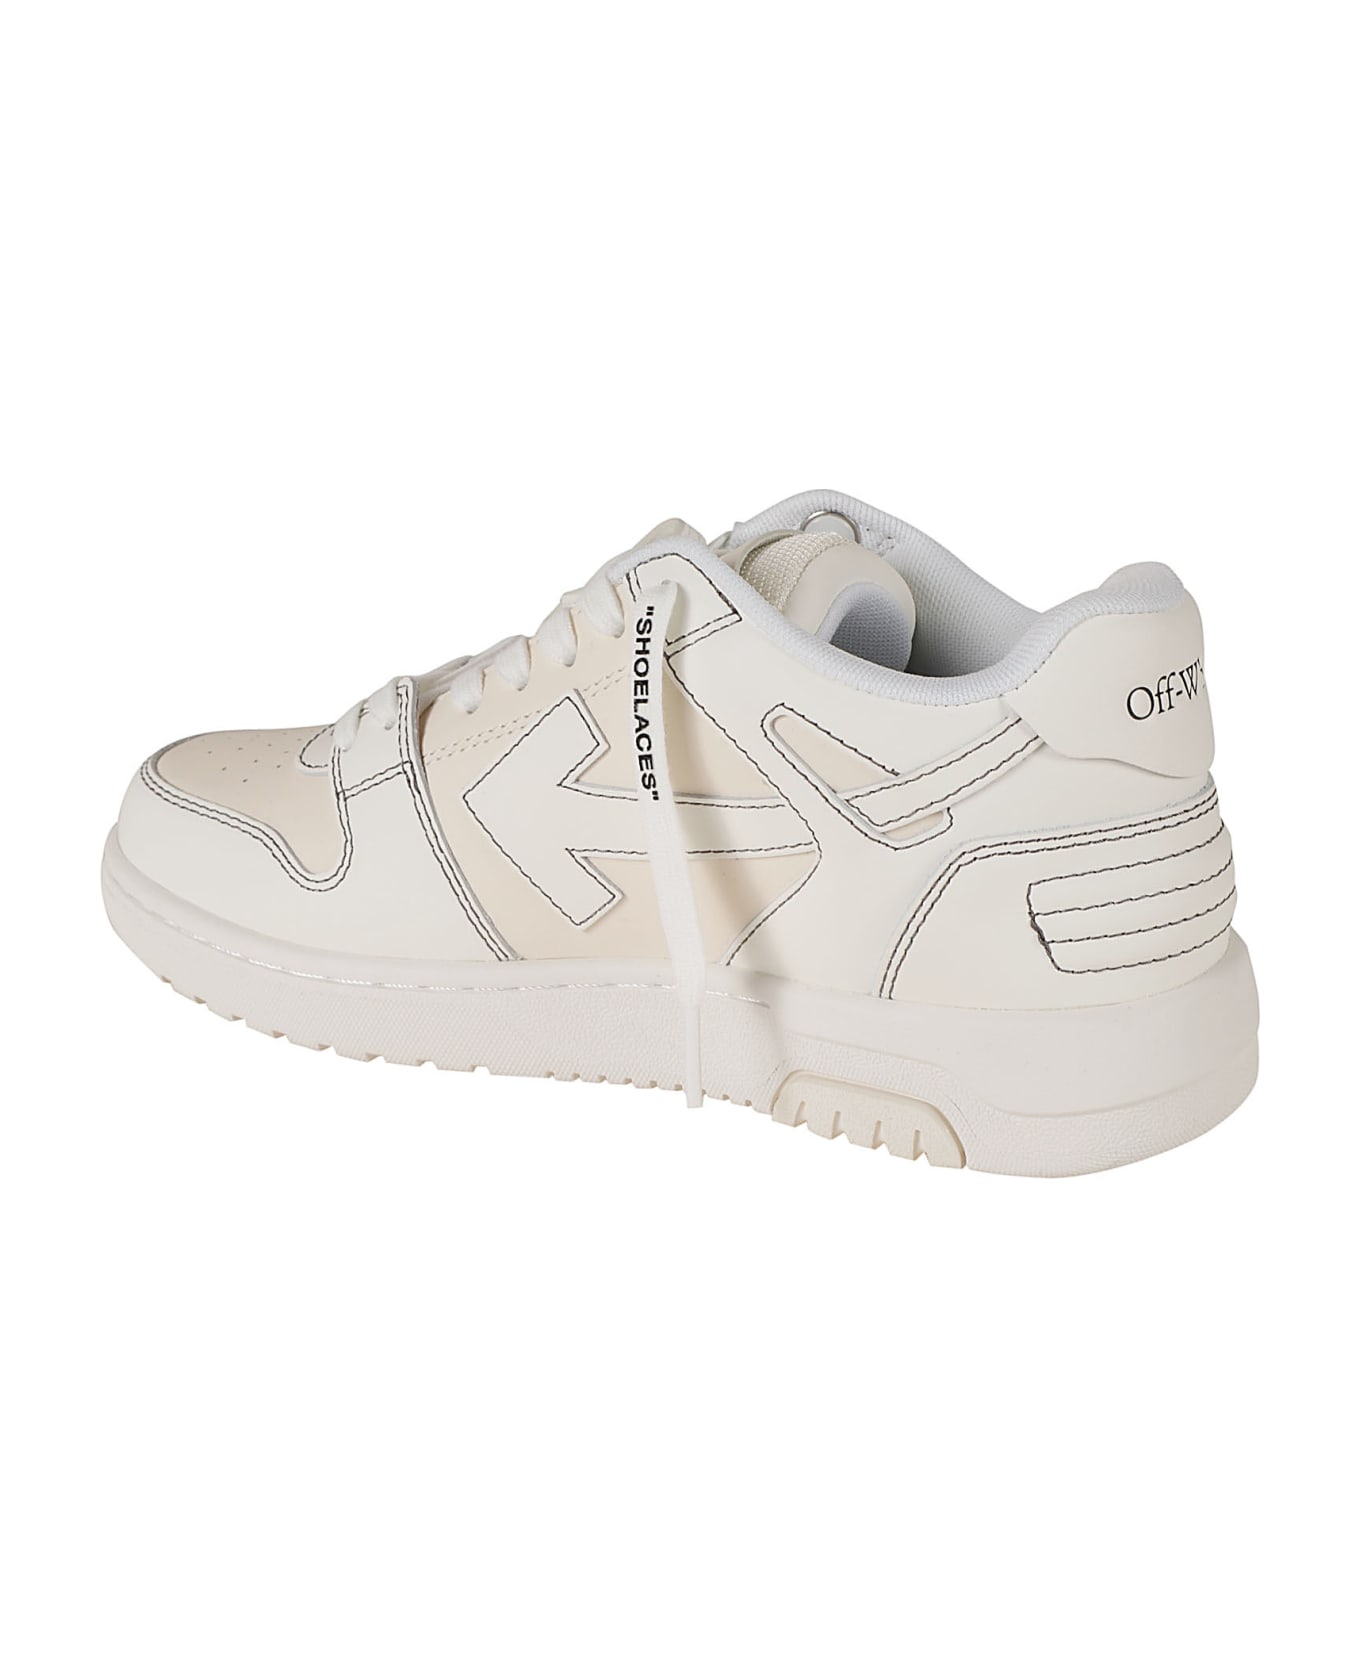 Off-White Out Of Office Sneakers - Cream/White